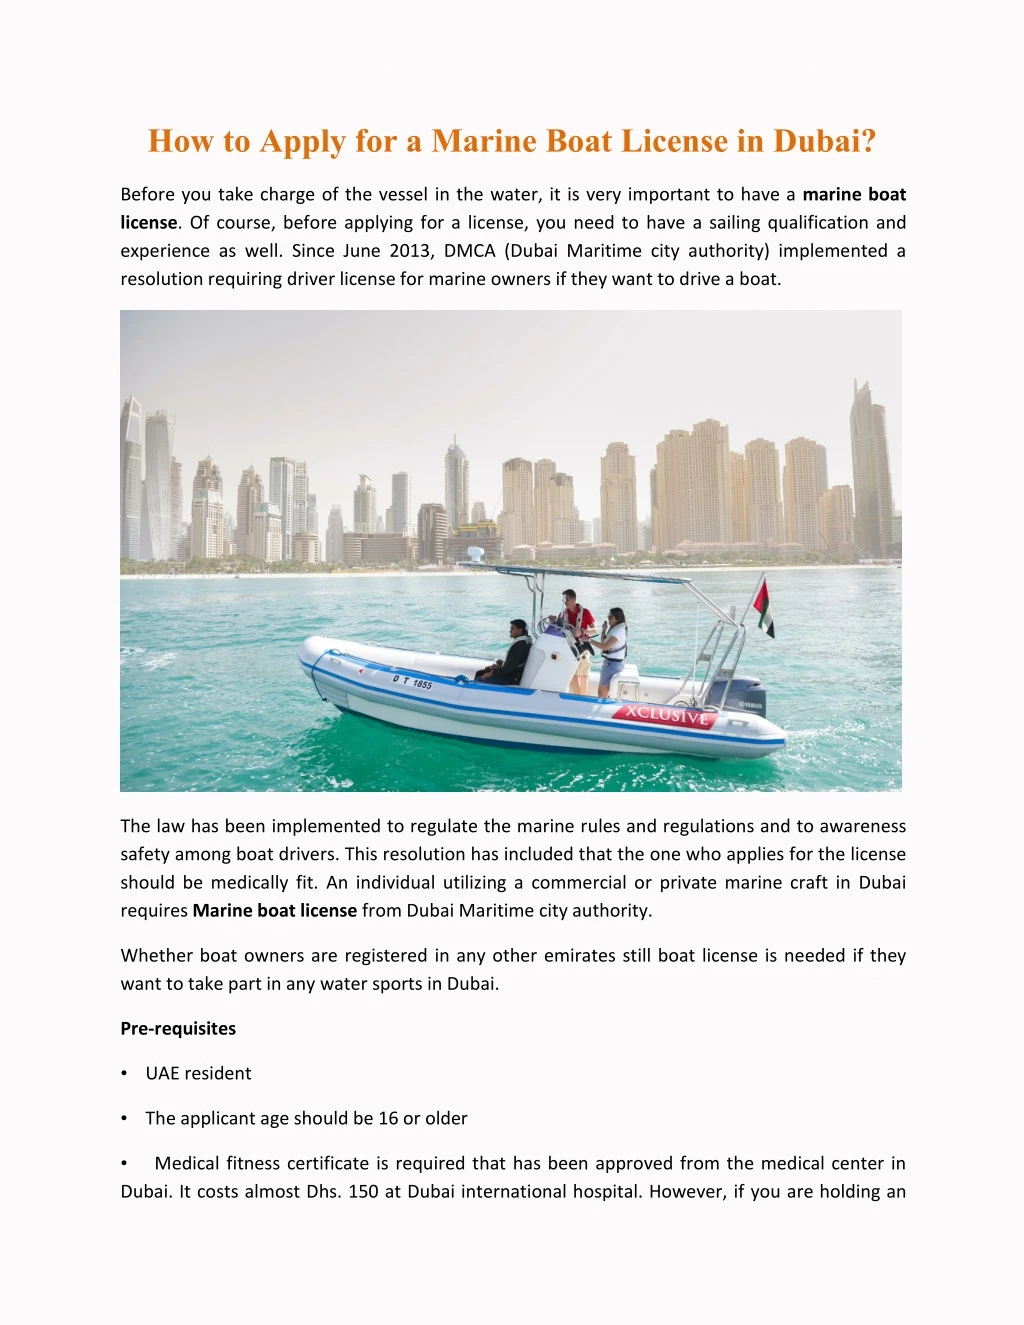 how to apply for a marine boat license in dubai